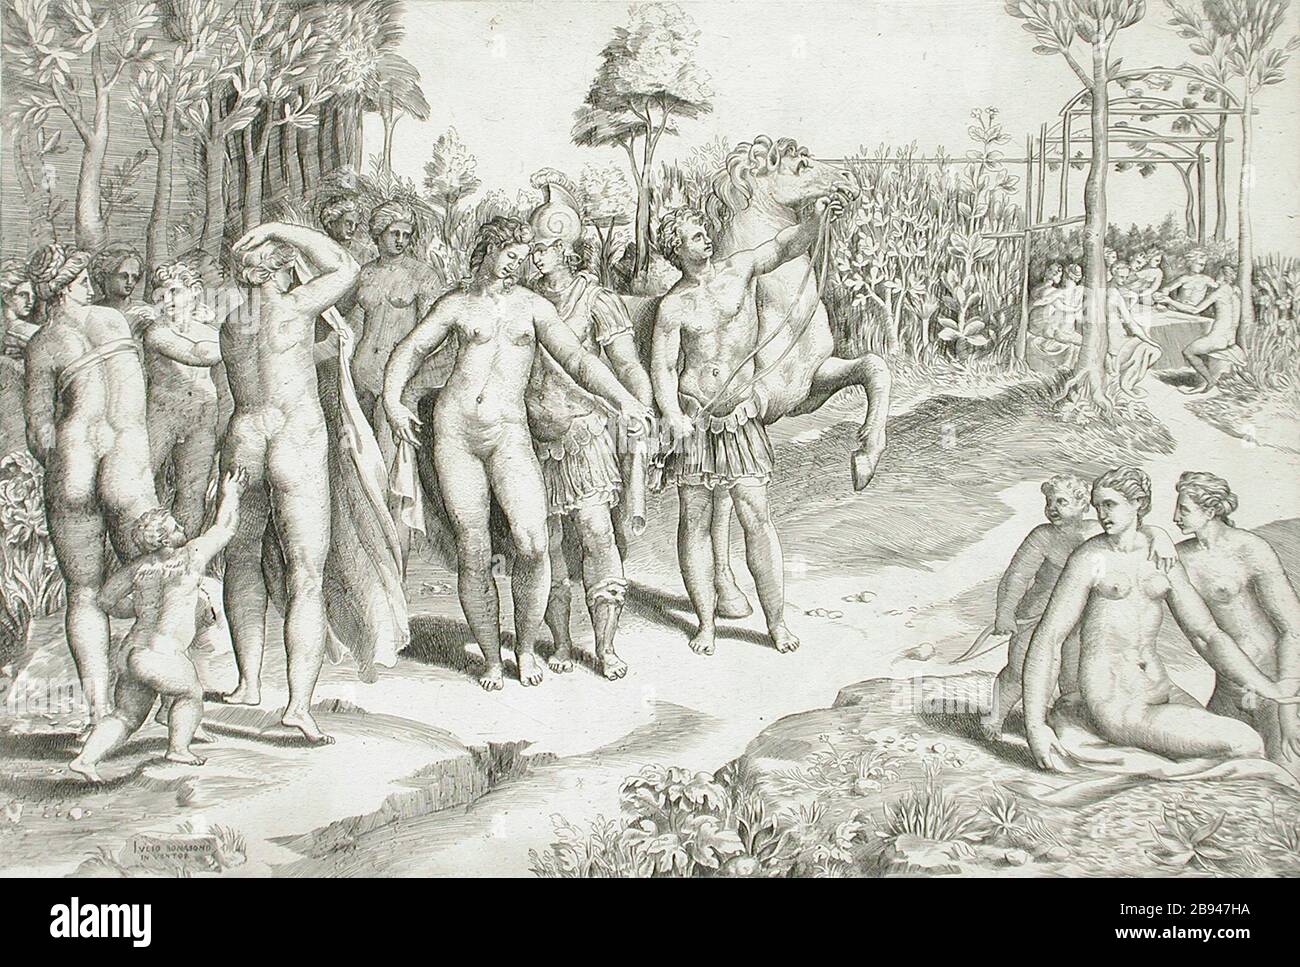 'Ruggero in the Garden of Alcina; English:  Italy, circa 1545 Prints; engravings Engraving Sheet: 13 1/2 x 19 1/8 in. (34.29 x 48.58 cm); image: 9 1/4 x 13 1/2 in. (23.5 x 34.29 cm) Mary Stansbury Ruiz Bequest (M.88.91.232) Prints and Drawings; circa 1545 date QS:P571,+1545-00-00T00:00:00Z/9,P1480,Q5727902; ' Stock Photo